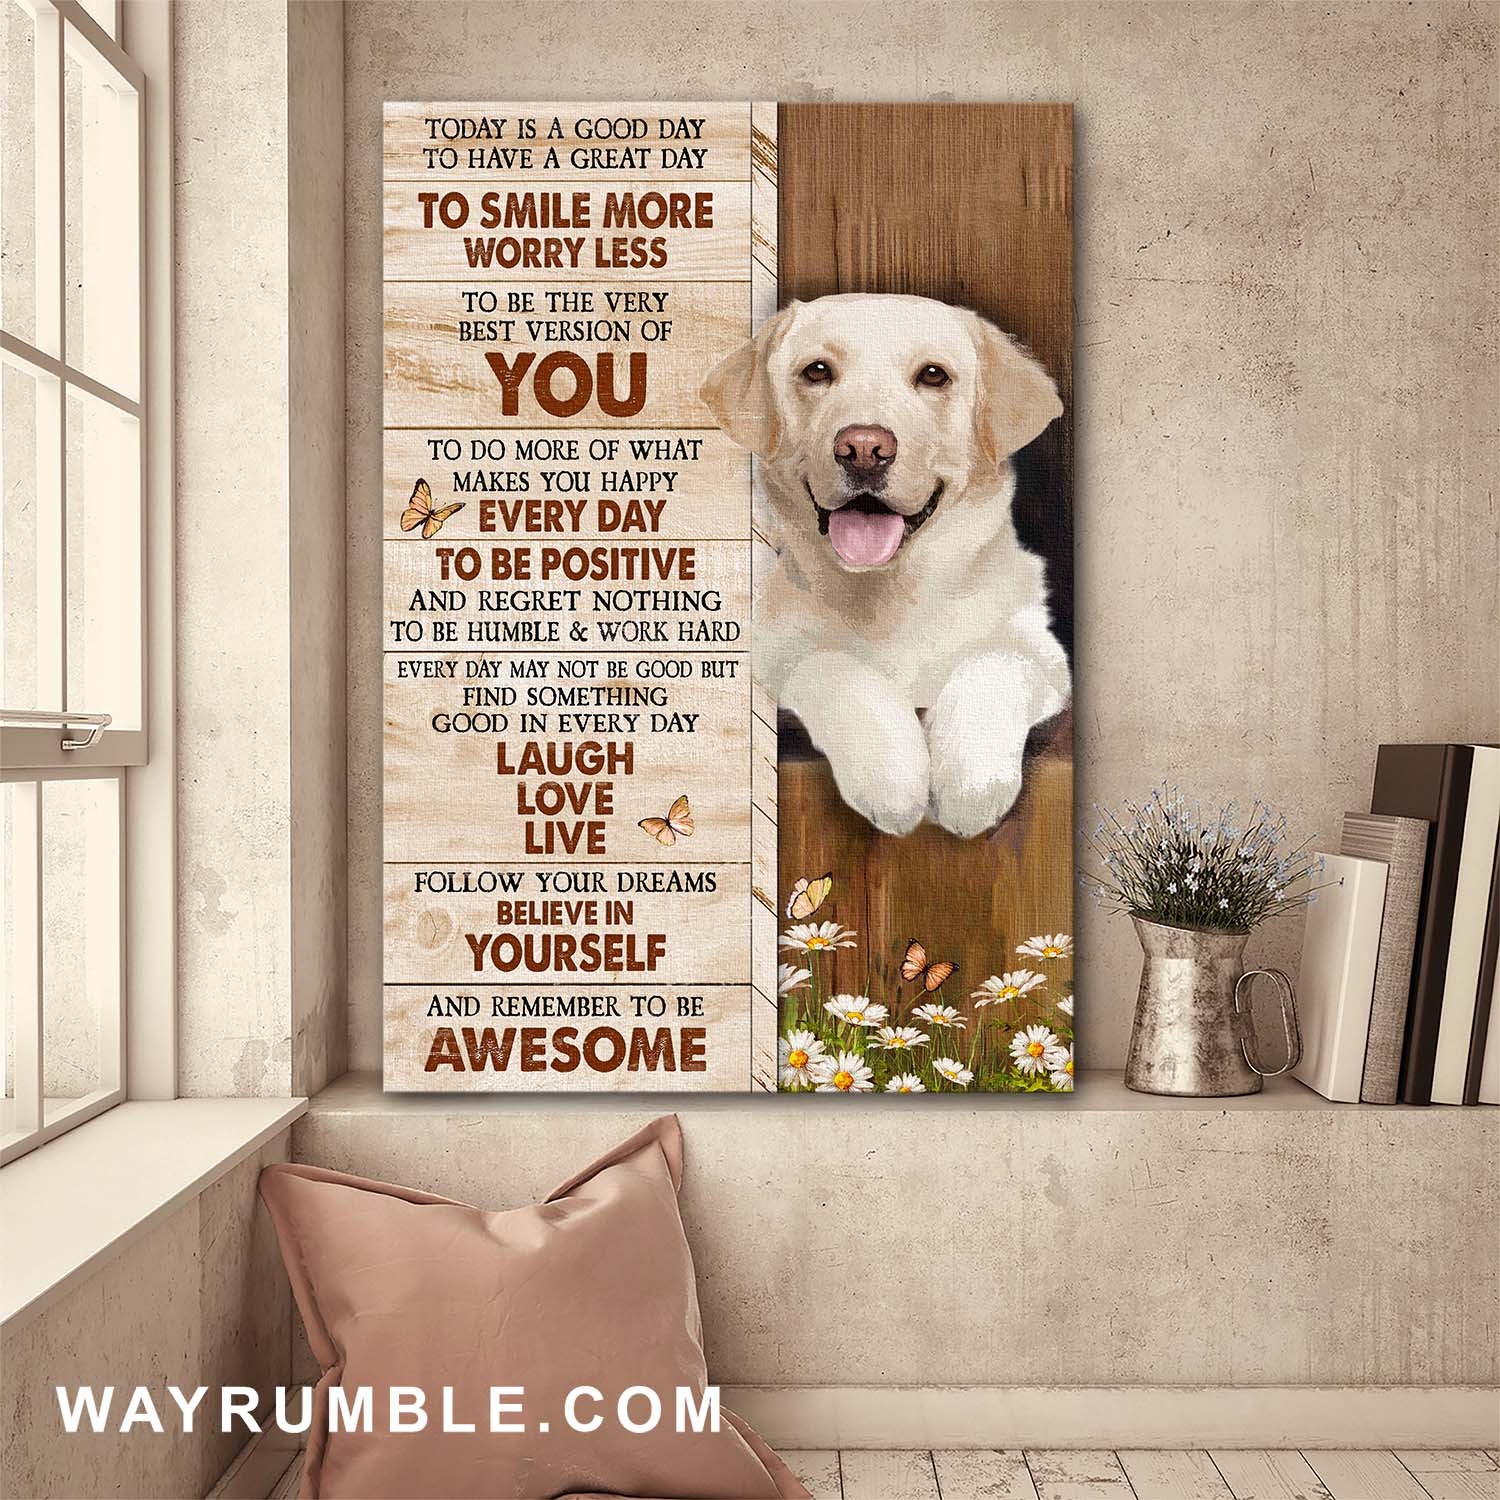 White Labrador, Believe in yourself and remember to be awesome - Dog Portrait Canvas Prints, Wall Art